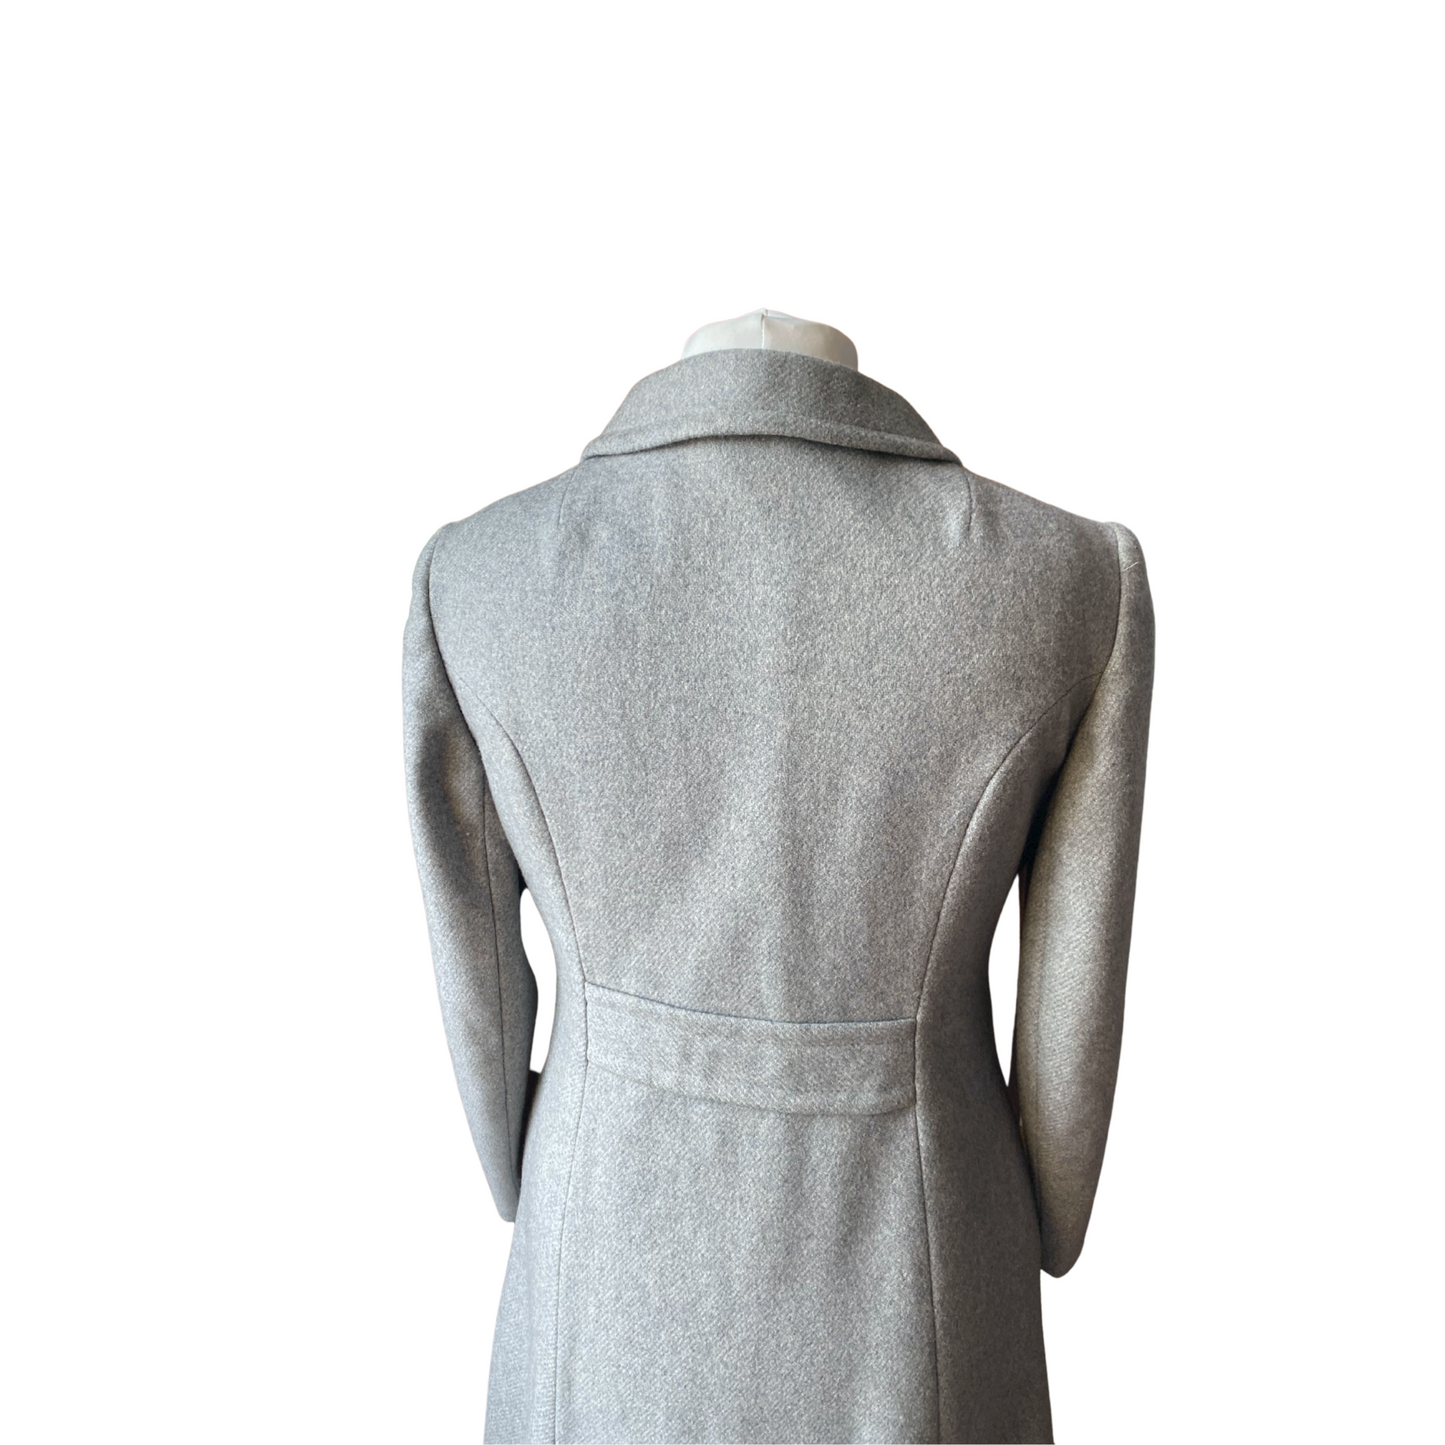 Grey wool 70s vintage coat - Lightweight yet warm winter outerwear for a comfortable experience